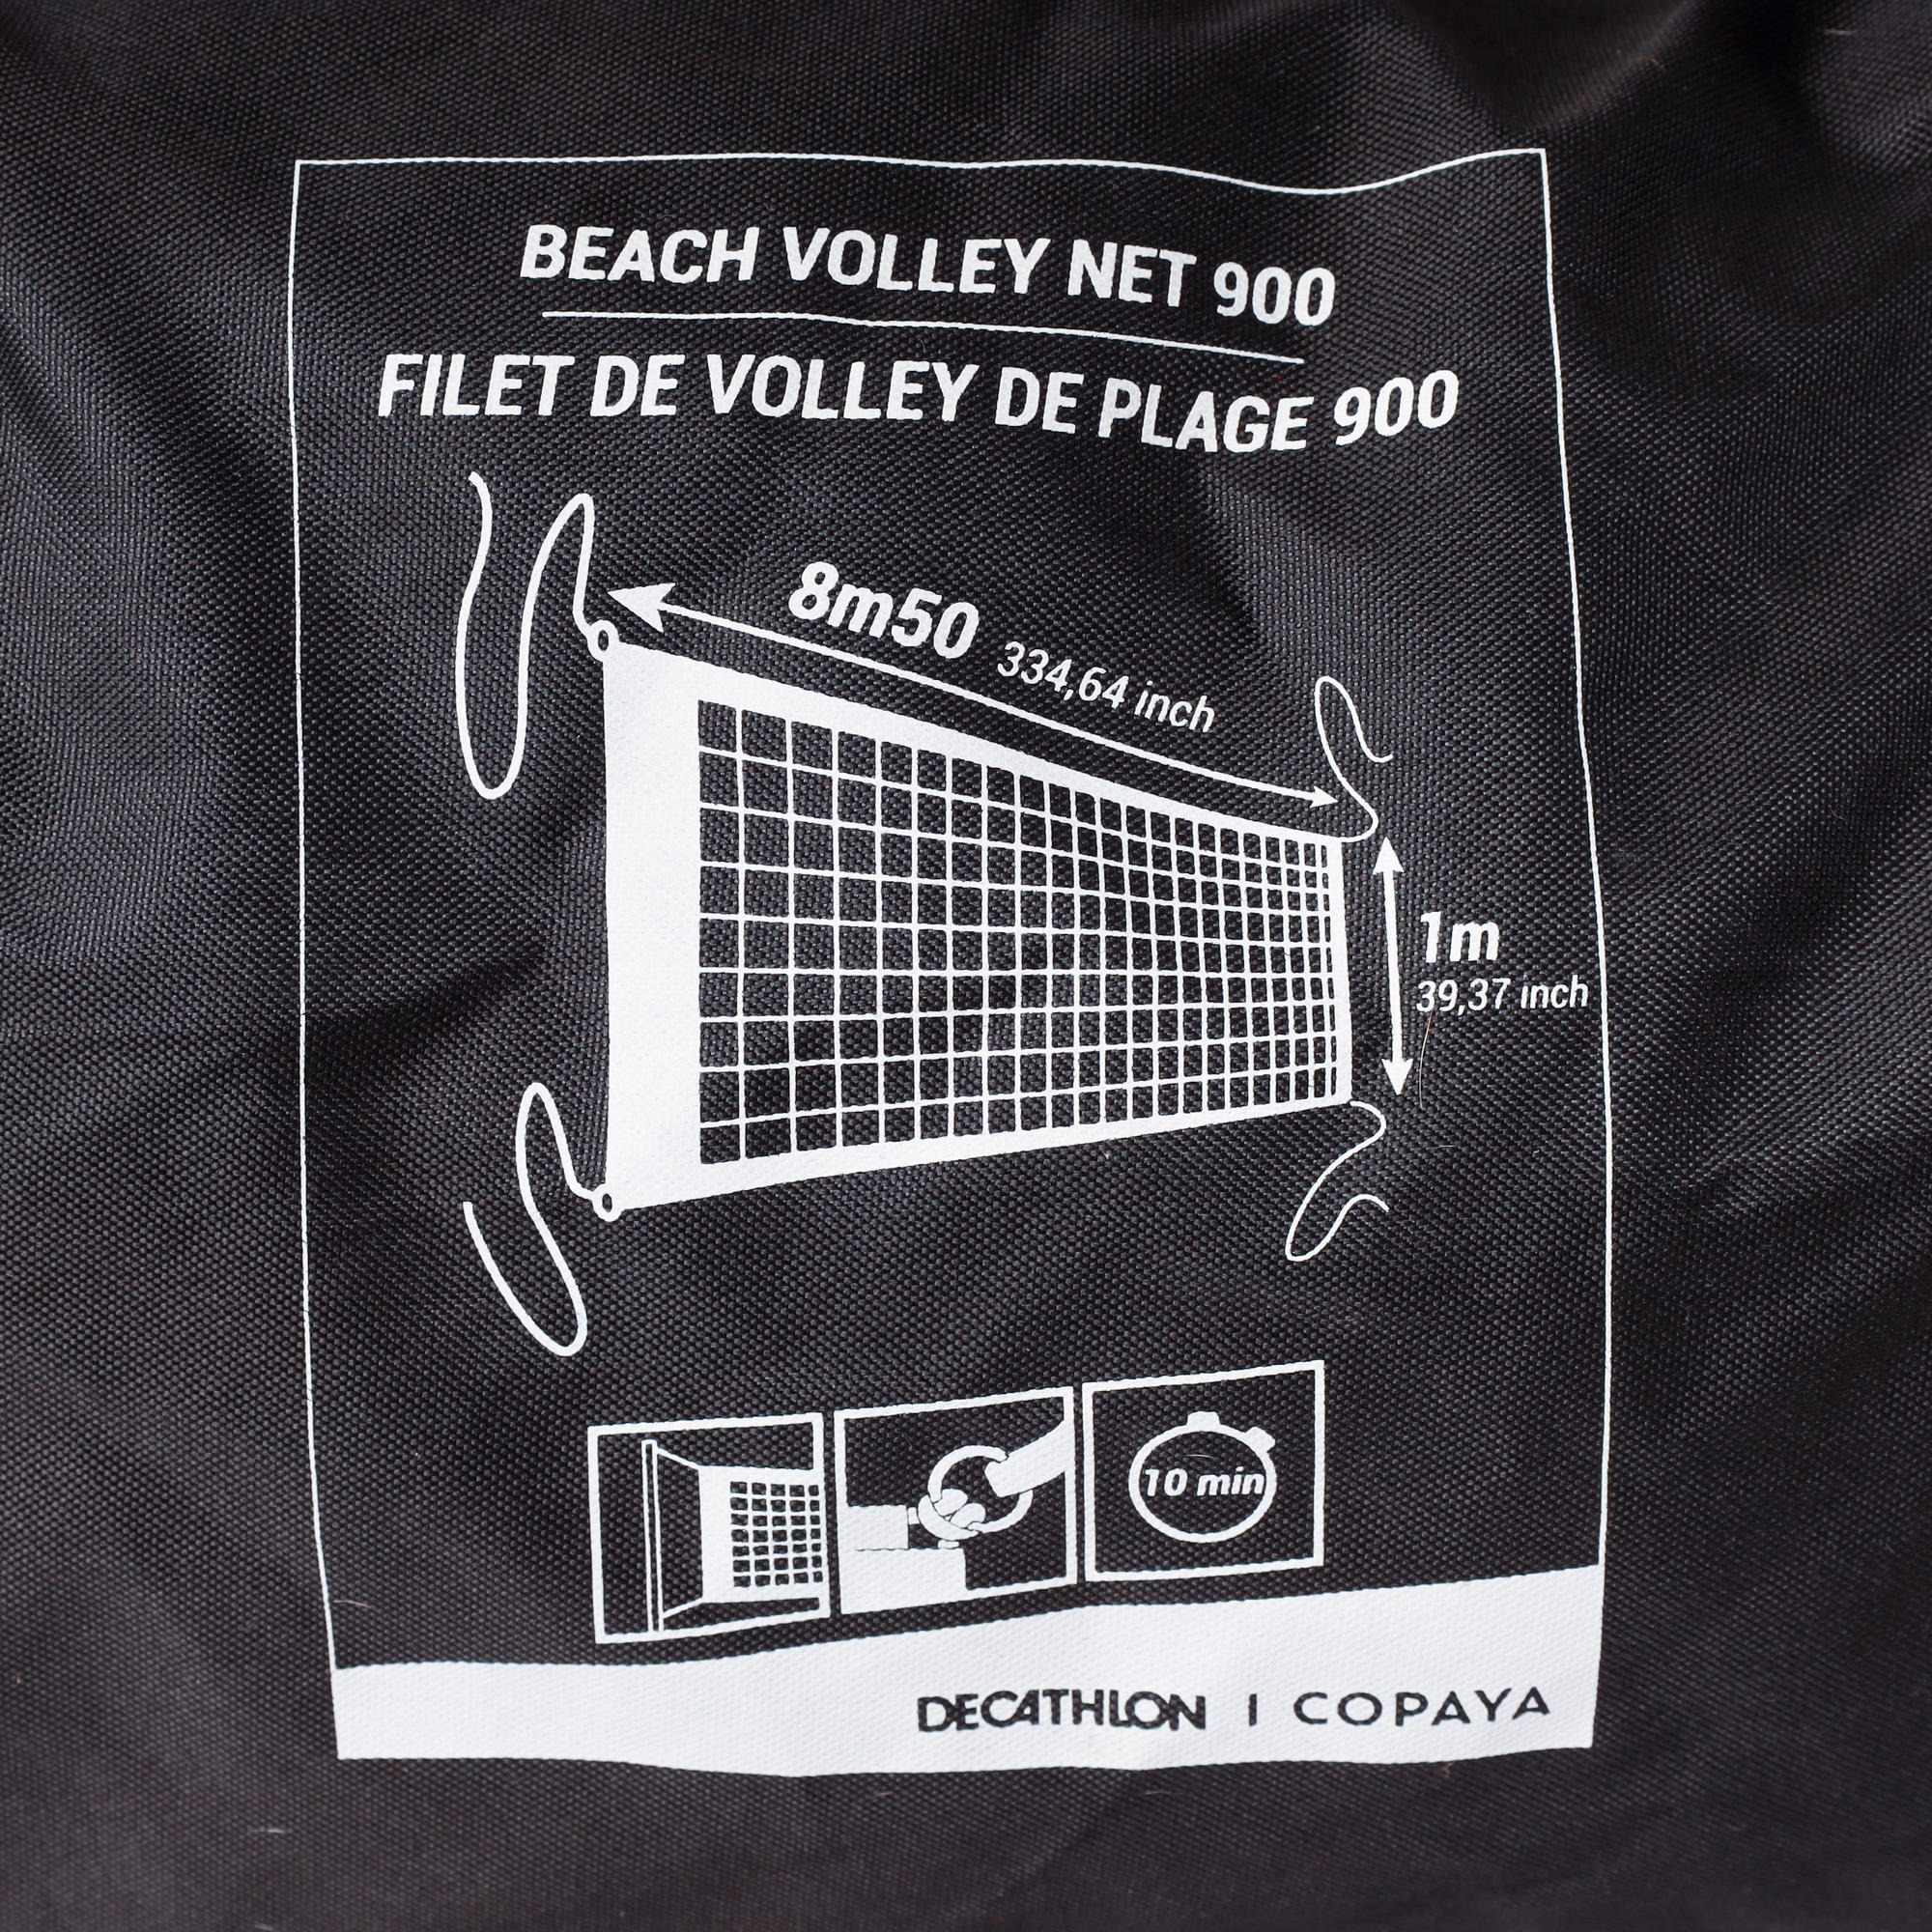 Beach Volleyball Net with Official Dimensions BVN900 3/11